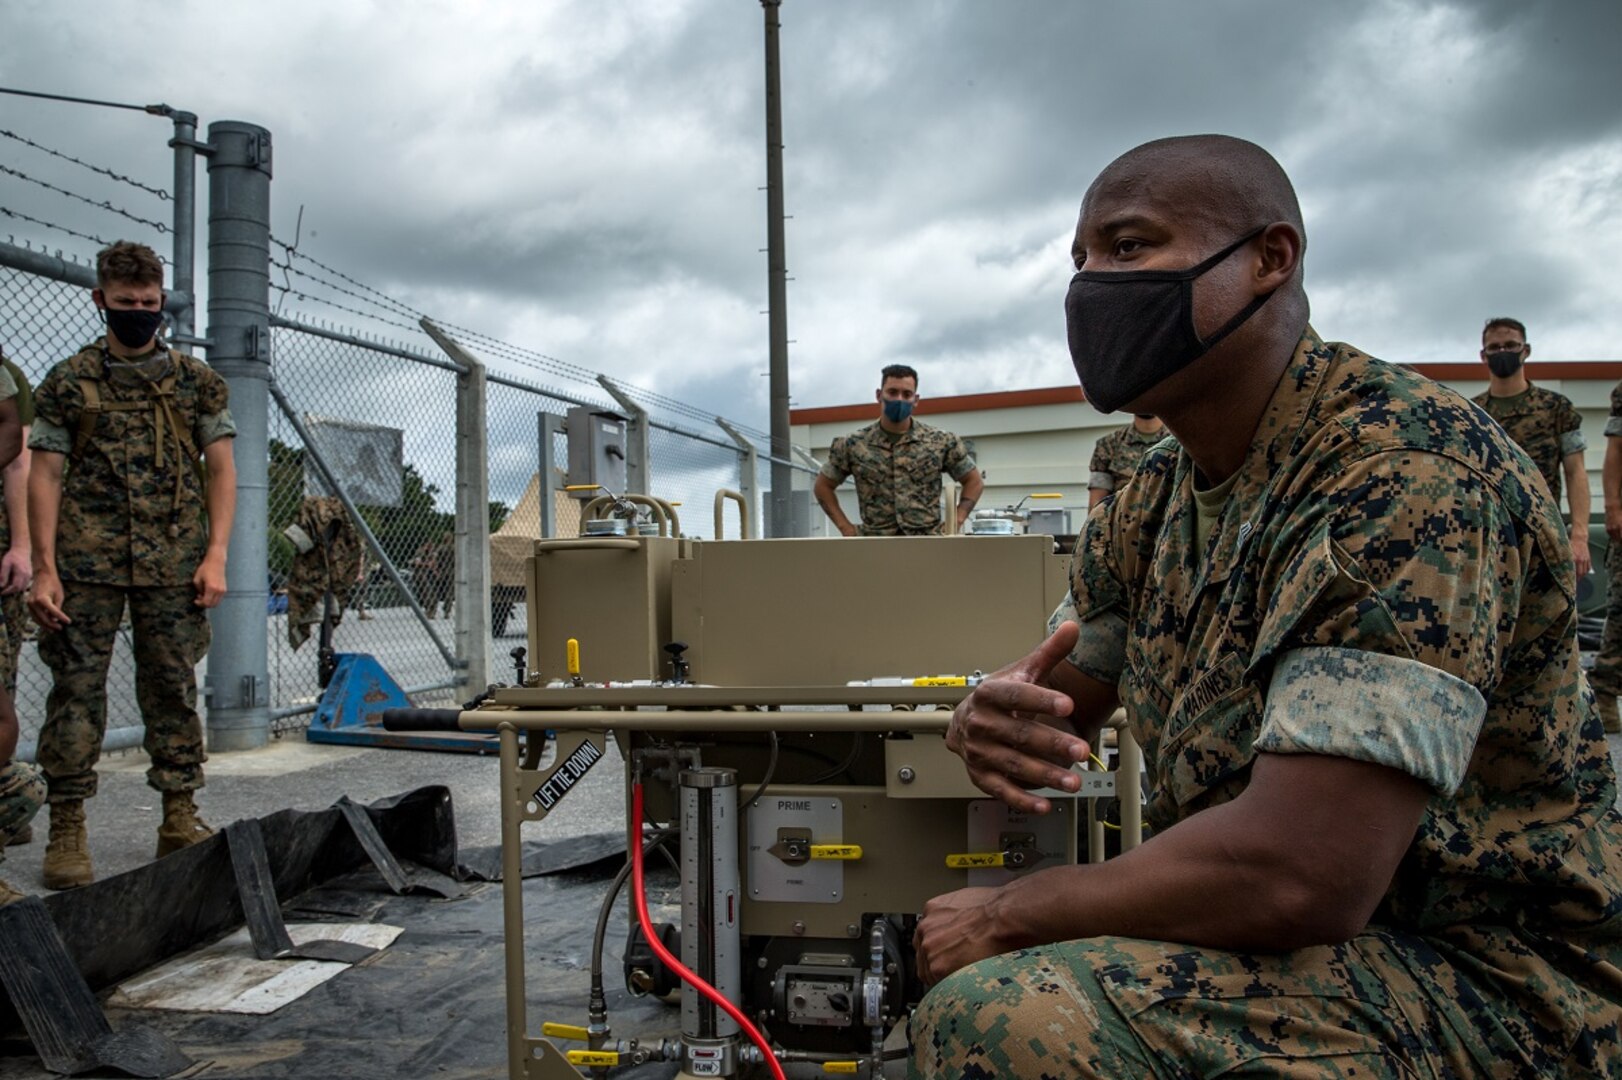 U.S. Marine Corps Sgt. Calvin Gravette III, a bulk fuel specialist with Bulk Fuel Company, 9th Engineer Support Battalion, 3d Marine Logistics Group (MLG), instructs Marines on the Expeditionary Mobile Fuel Additization (EMFAC) on Camp Hansen, Okinawa, Japan, May 12, 2021. Gravette is a graduate from the EMFAC New Equipment Training, and is the lead EMFAC training instructor for III Marine Expeditionary Force (MEF). 3d MLG, based out of Okinawa, Japan, is a forward deployed combat unit that serves as III MEF’s comprehensive logistics and combat service support backbone for operations throughout the Indo-Pacific area of responsibility.